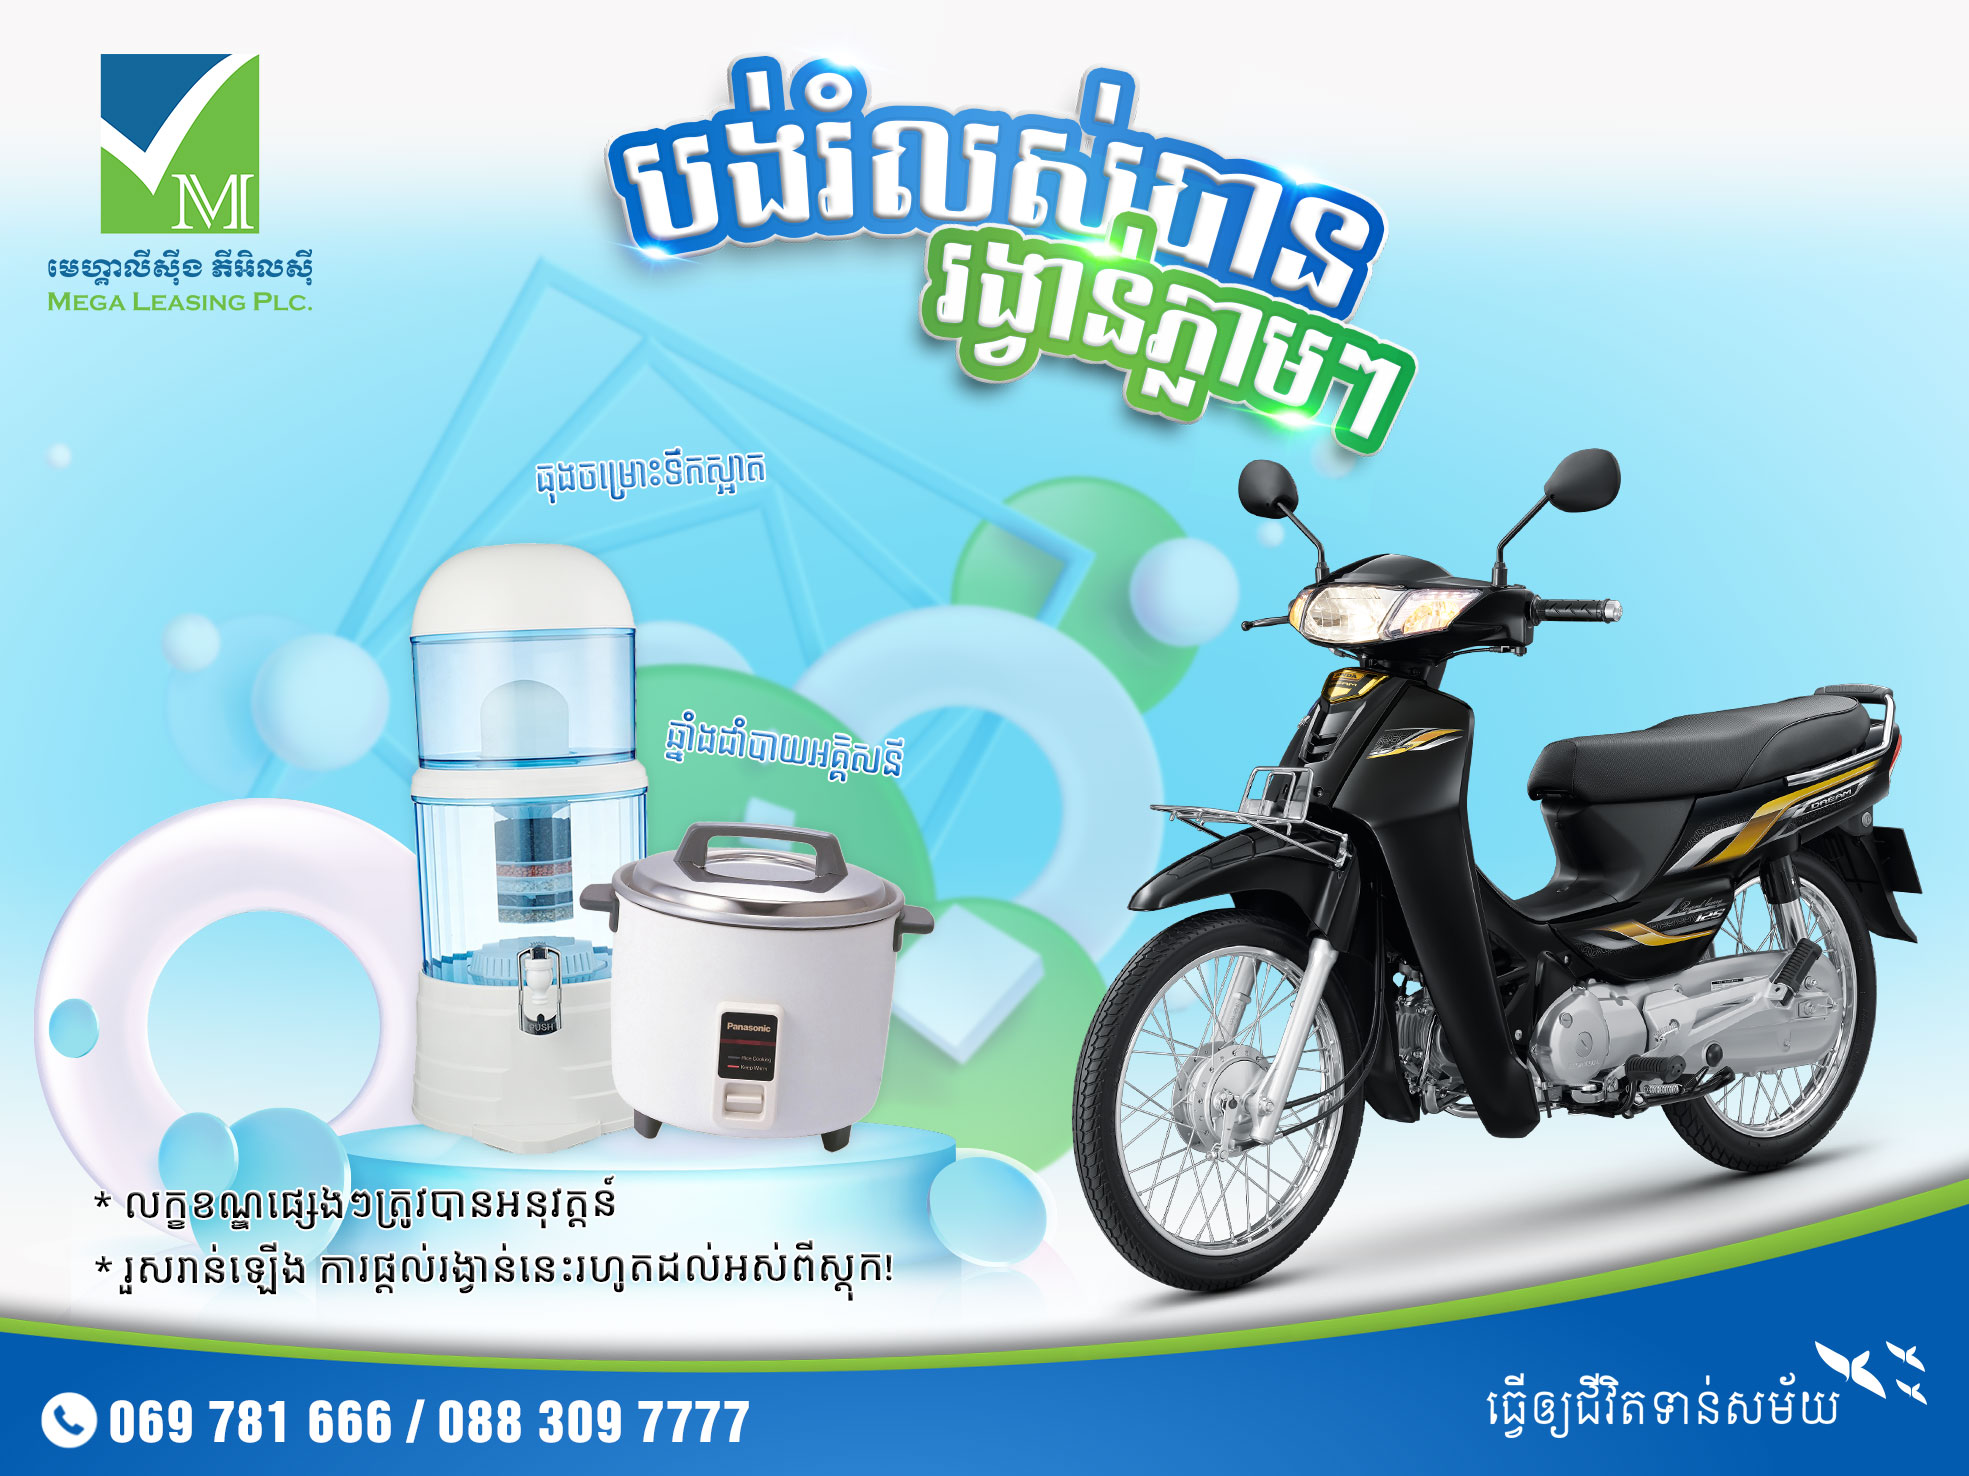 Returning to a motorcycle lease, you will received: rice cooker and water purifier pot